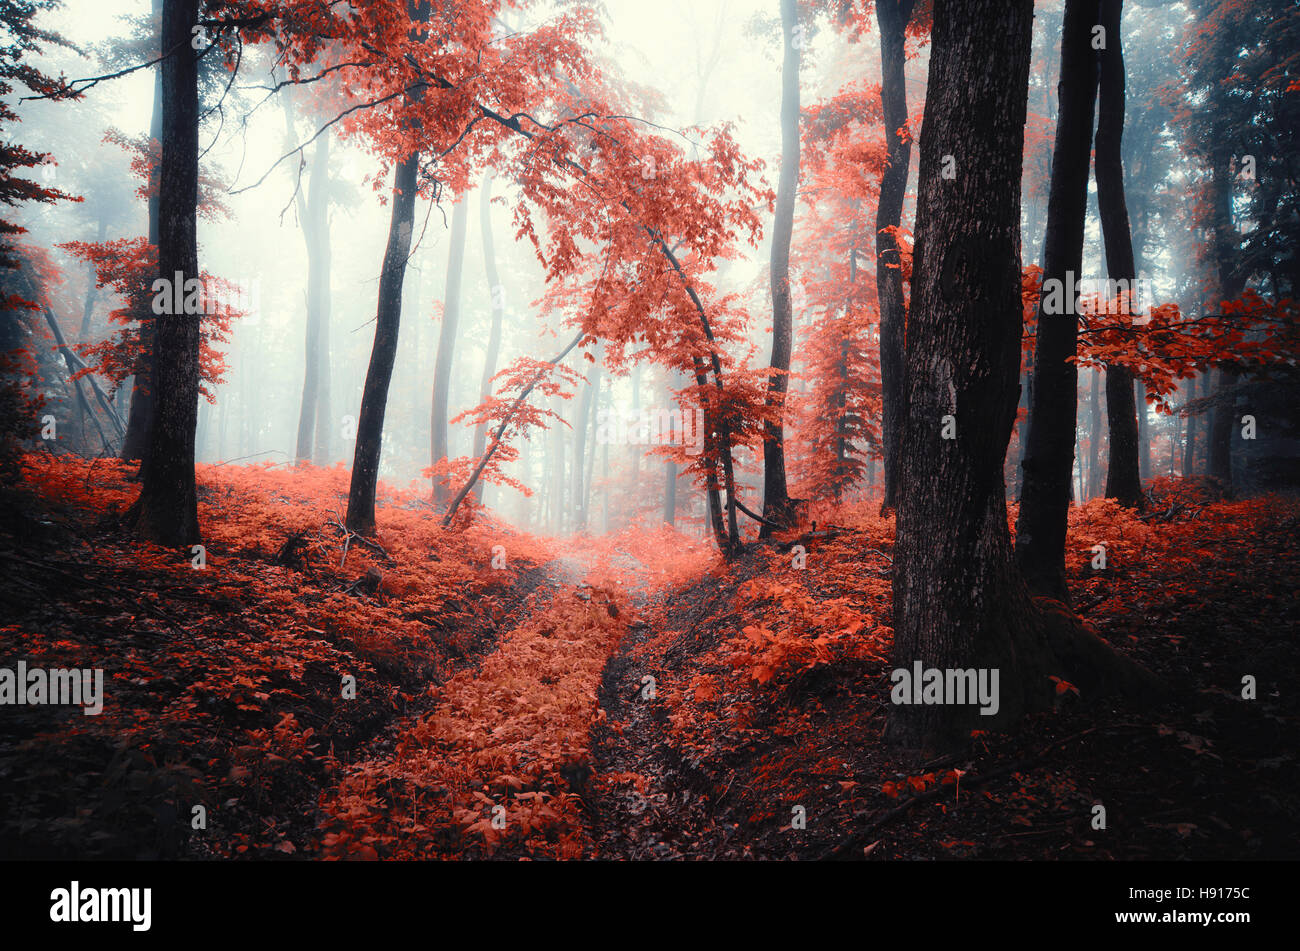 Misty forest autumn landscape. Colorful foliage on misty rainy fall day in the woods Stock Photo